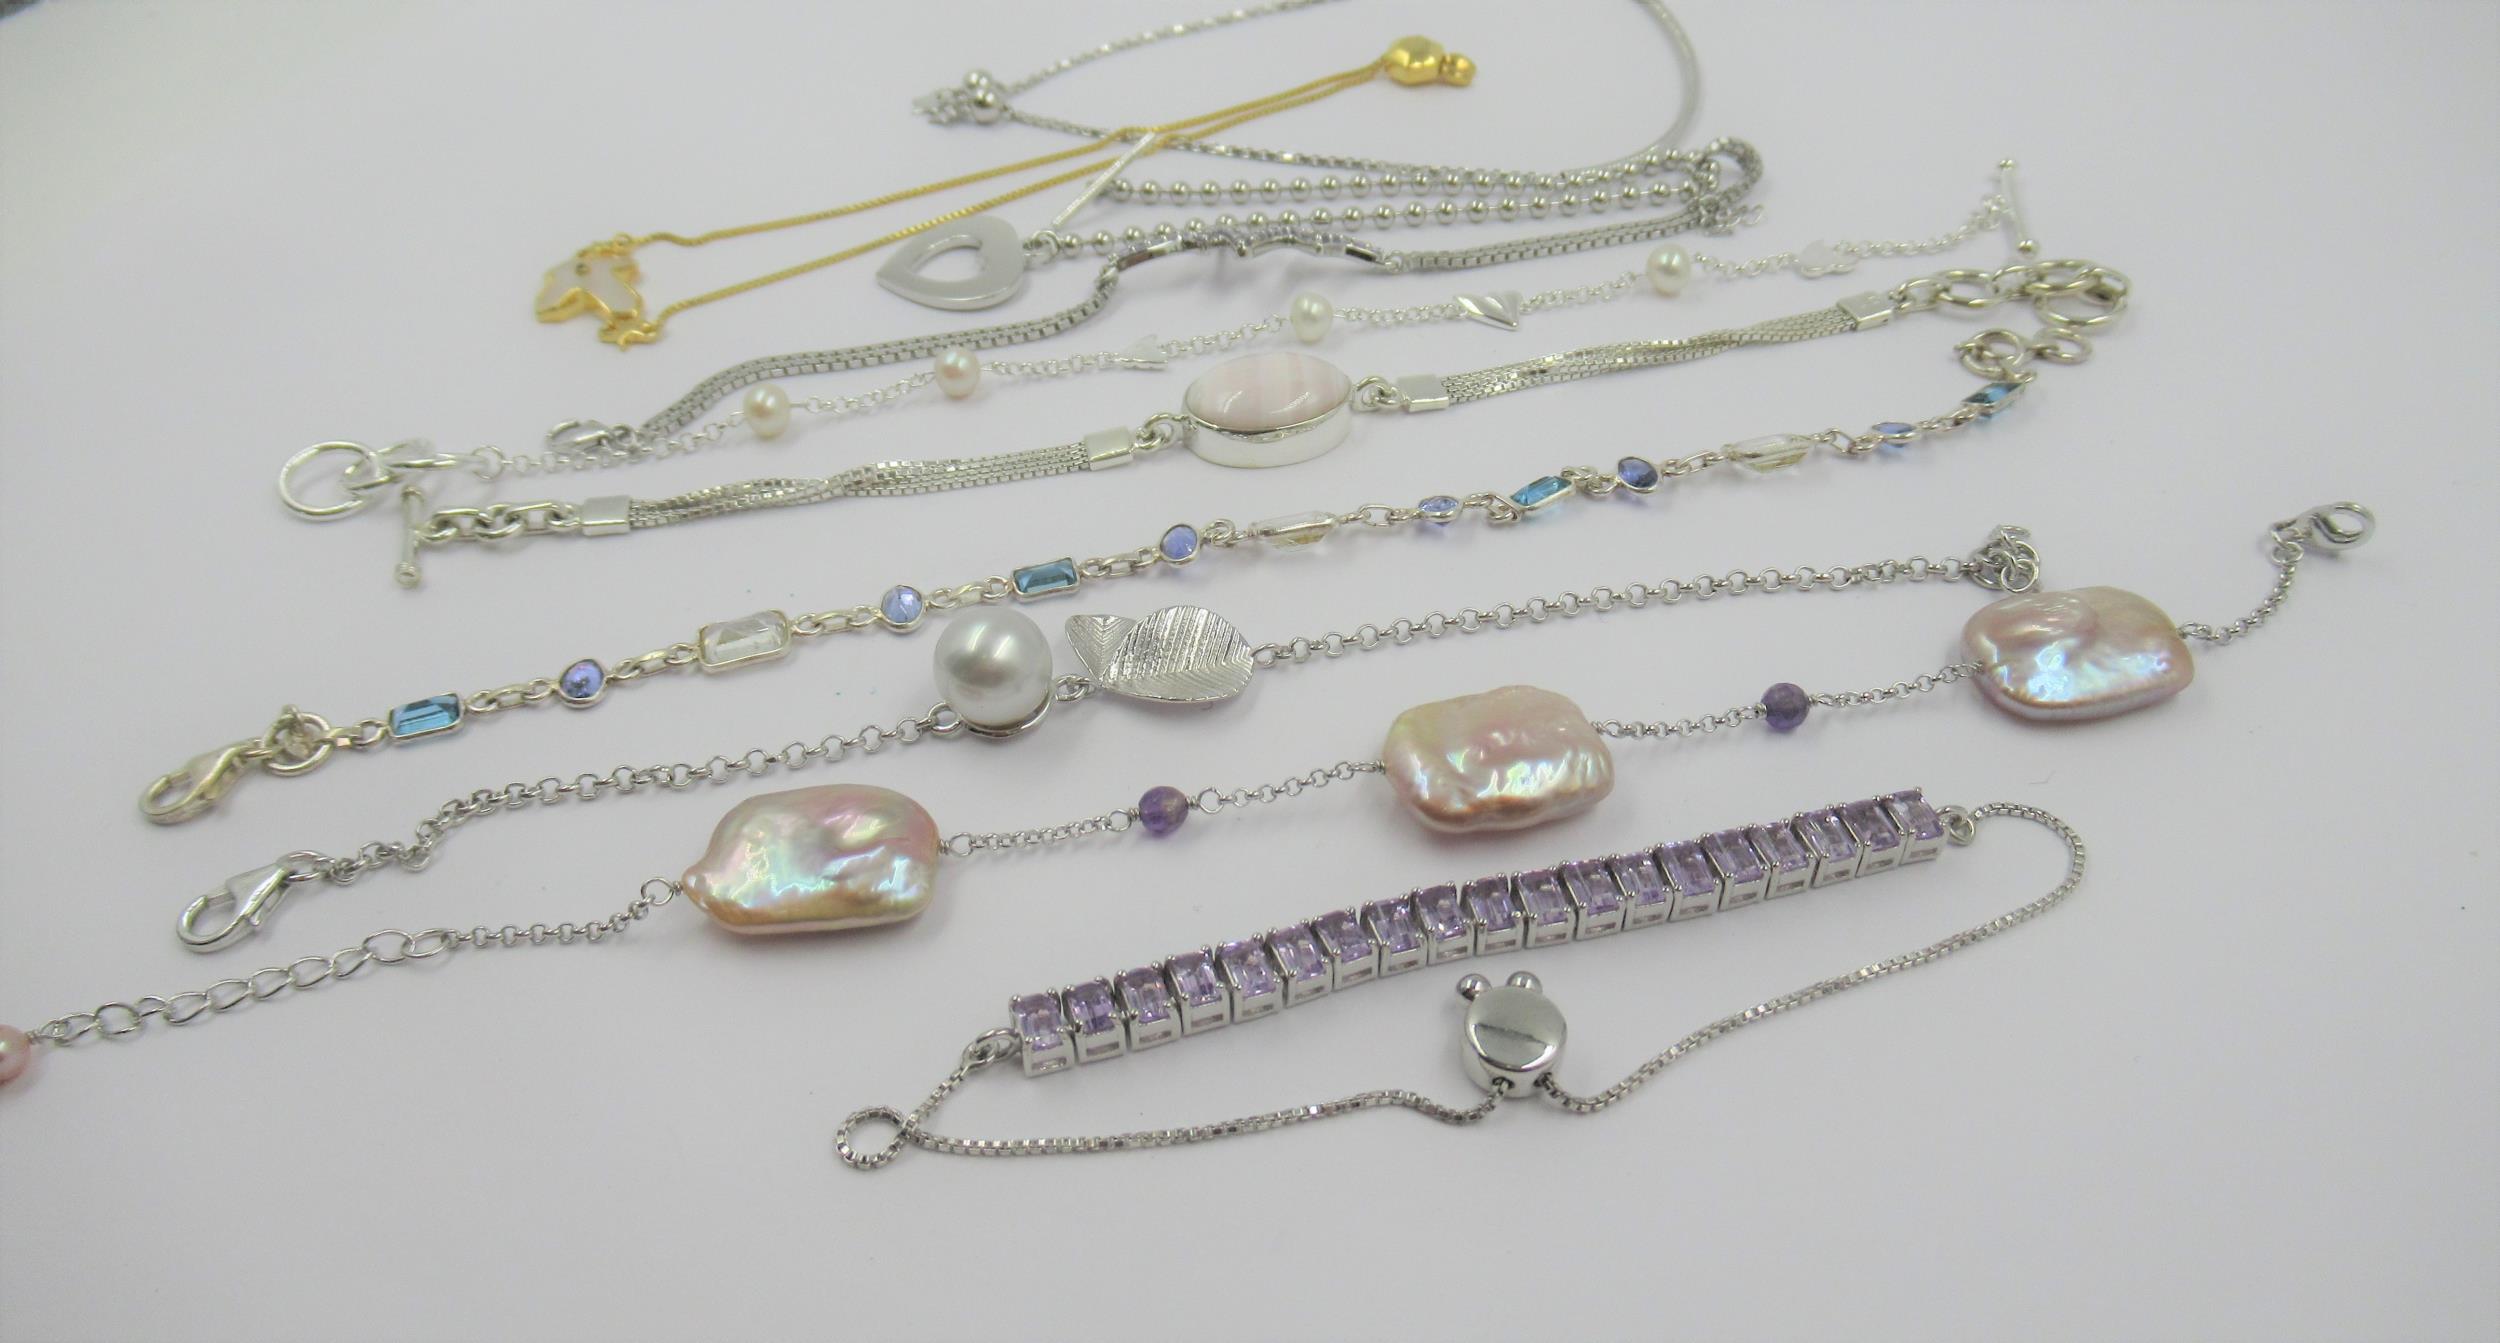 Group of ten various silver bracelets set with various semi precious and gem stones